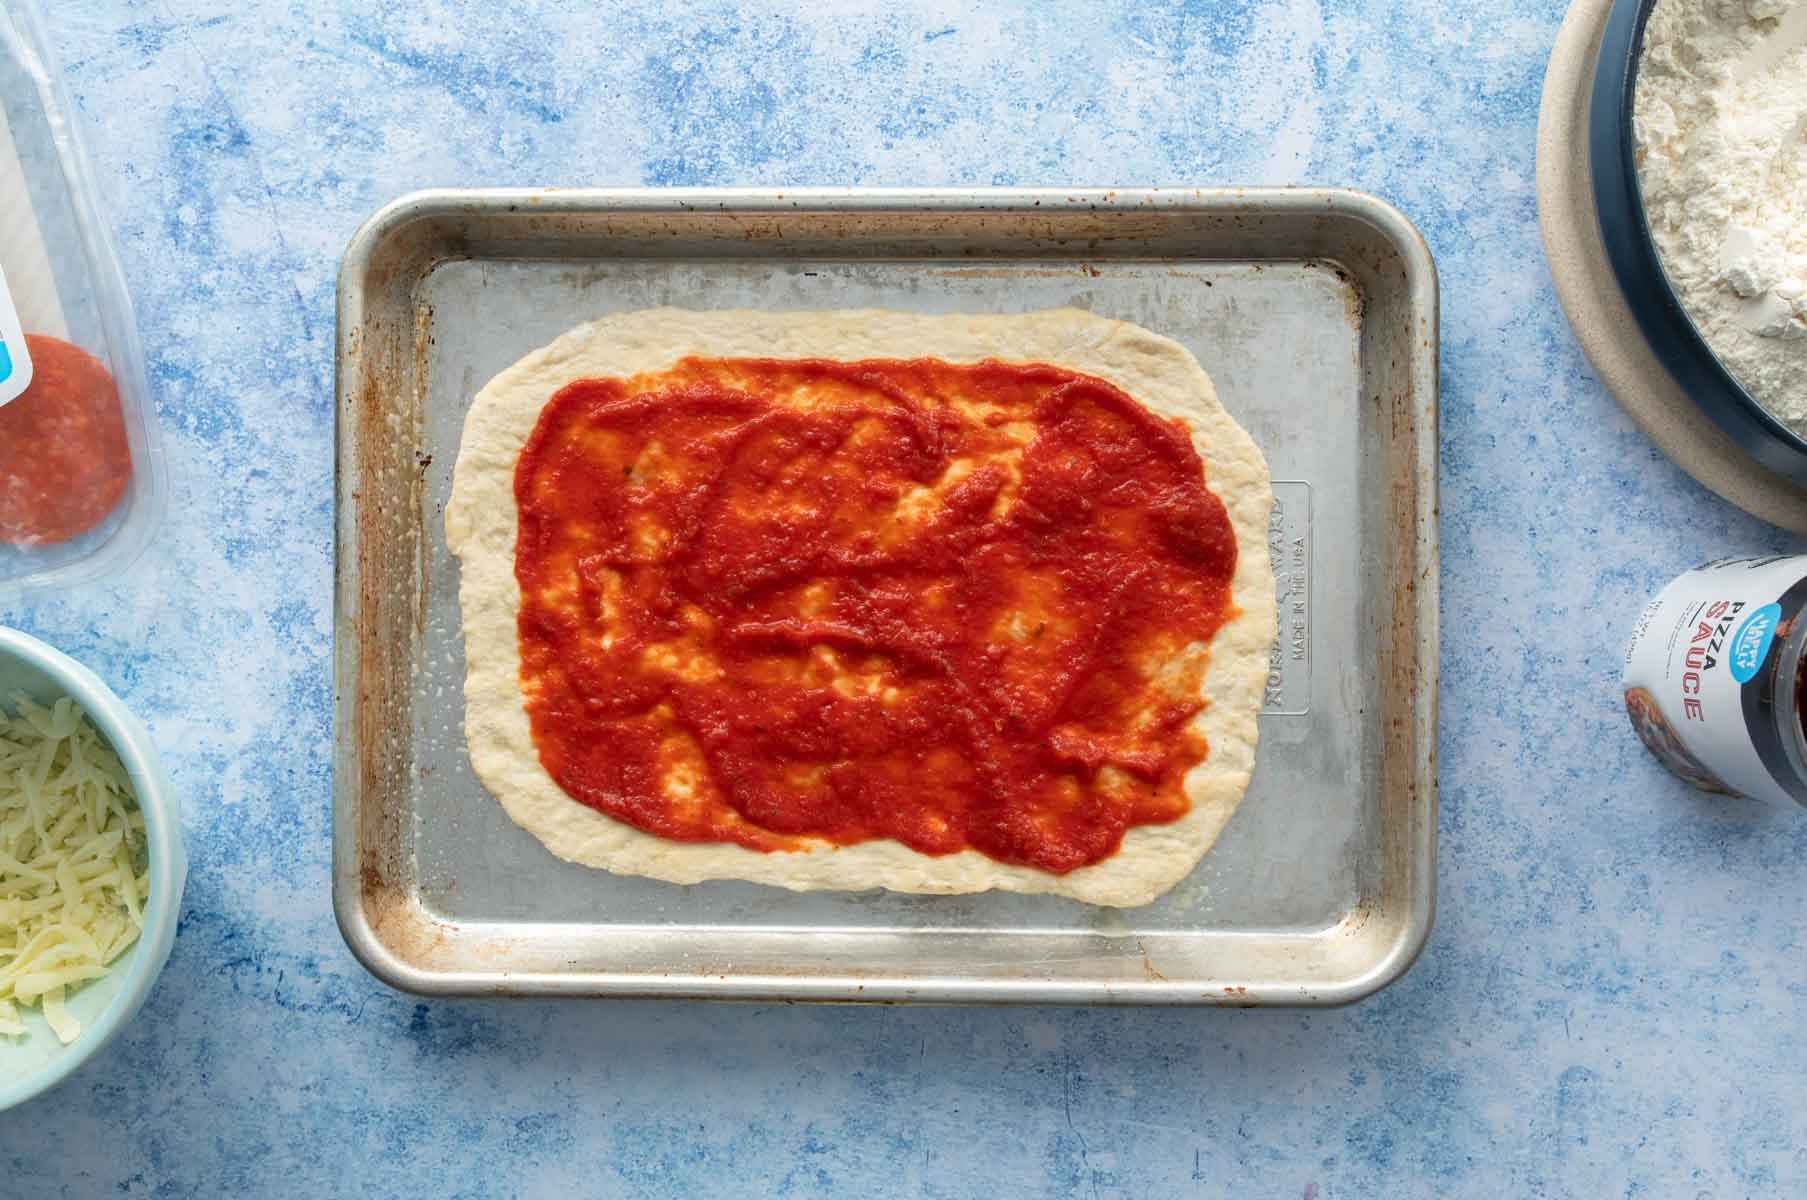 rectangular pizza dough with pizza sauce on it